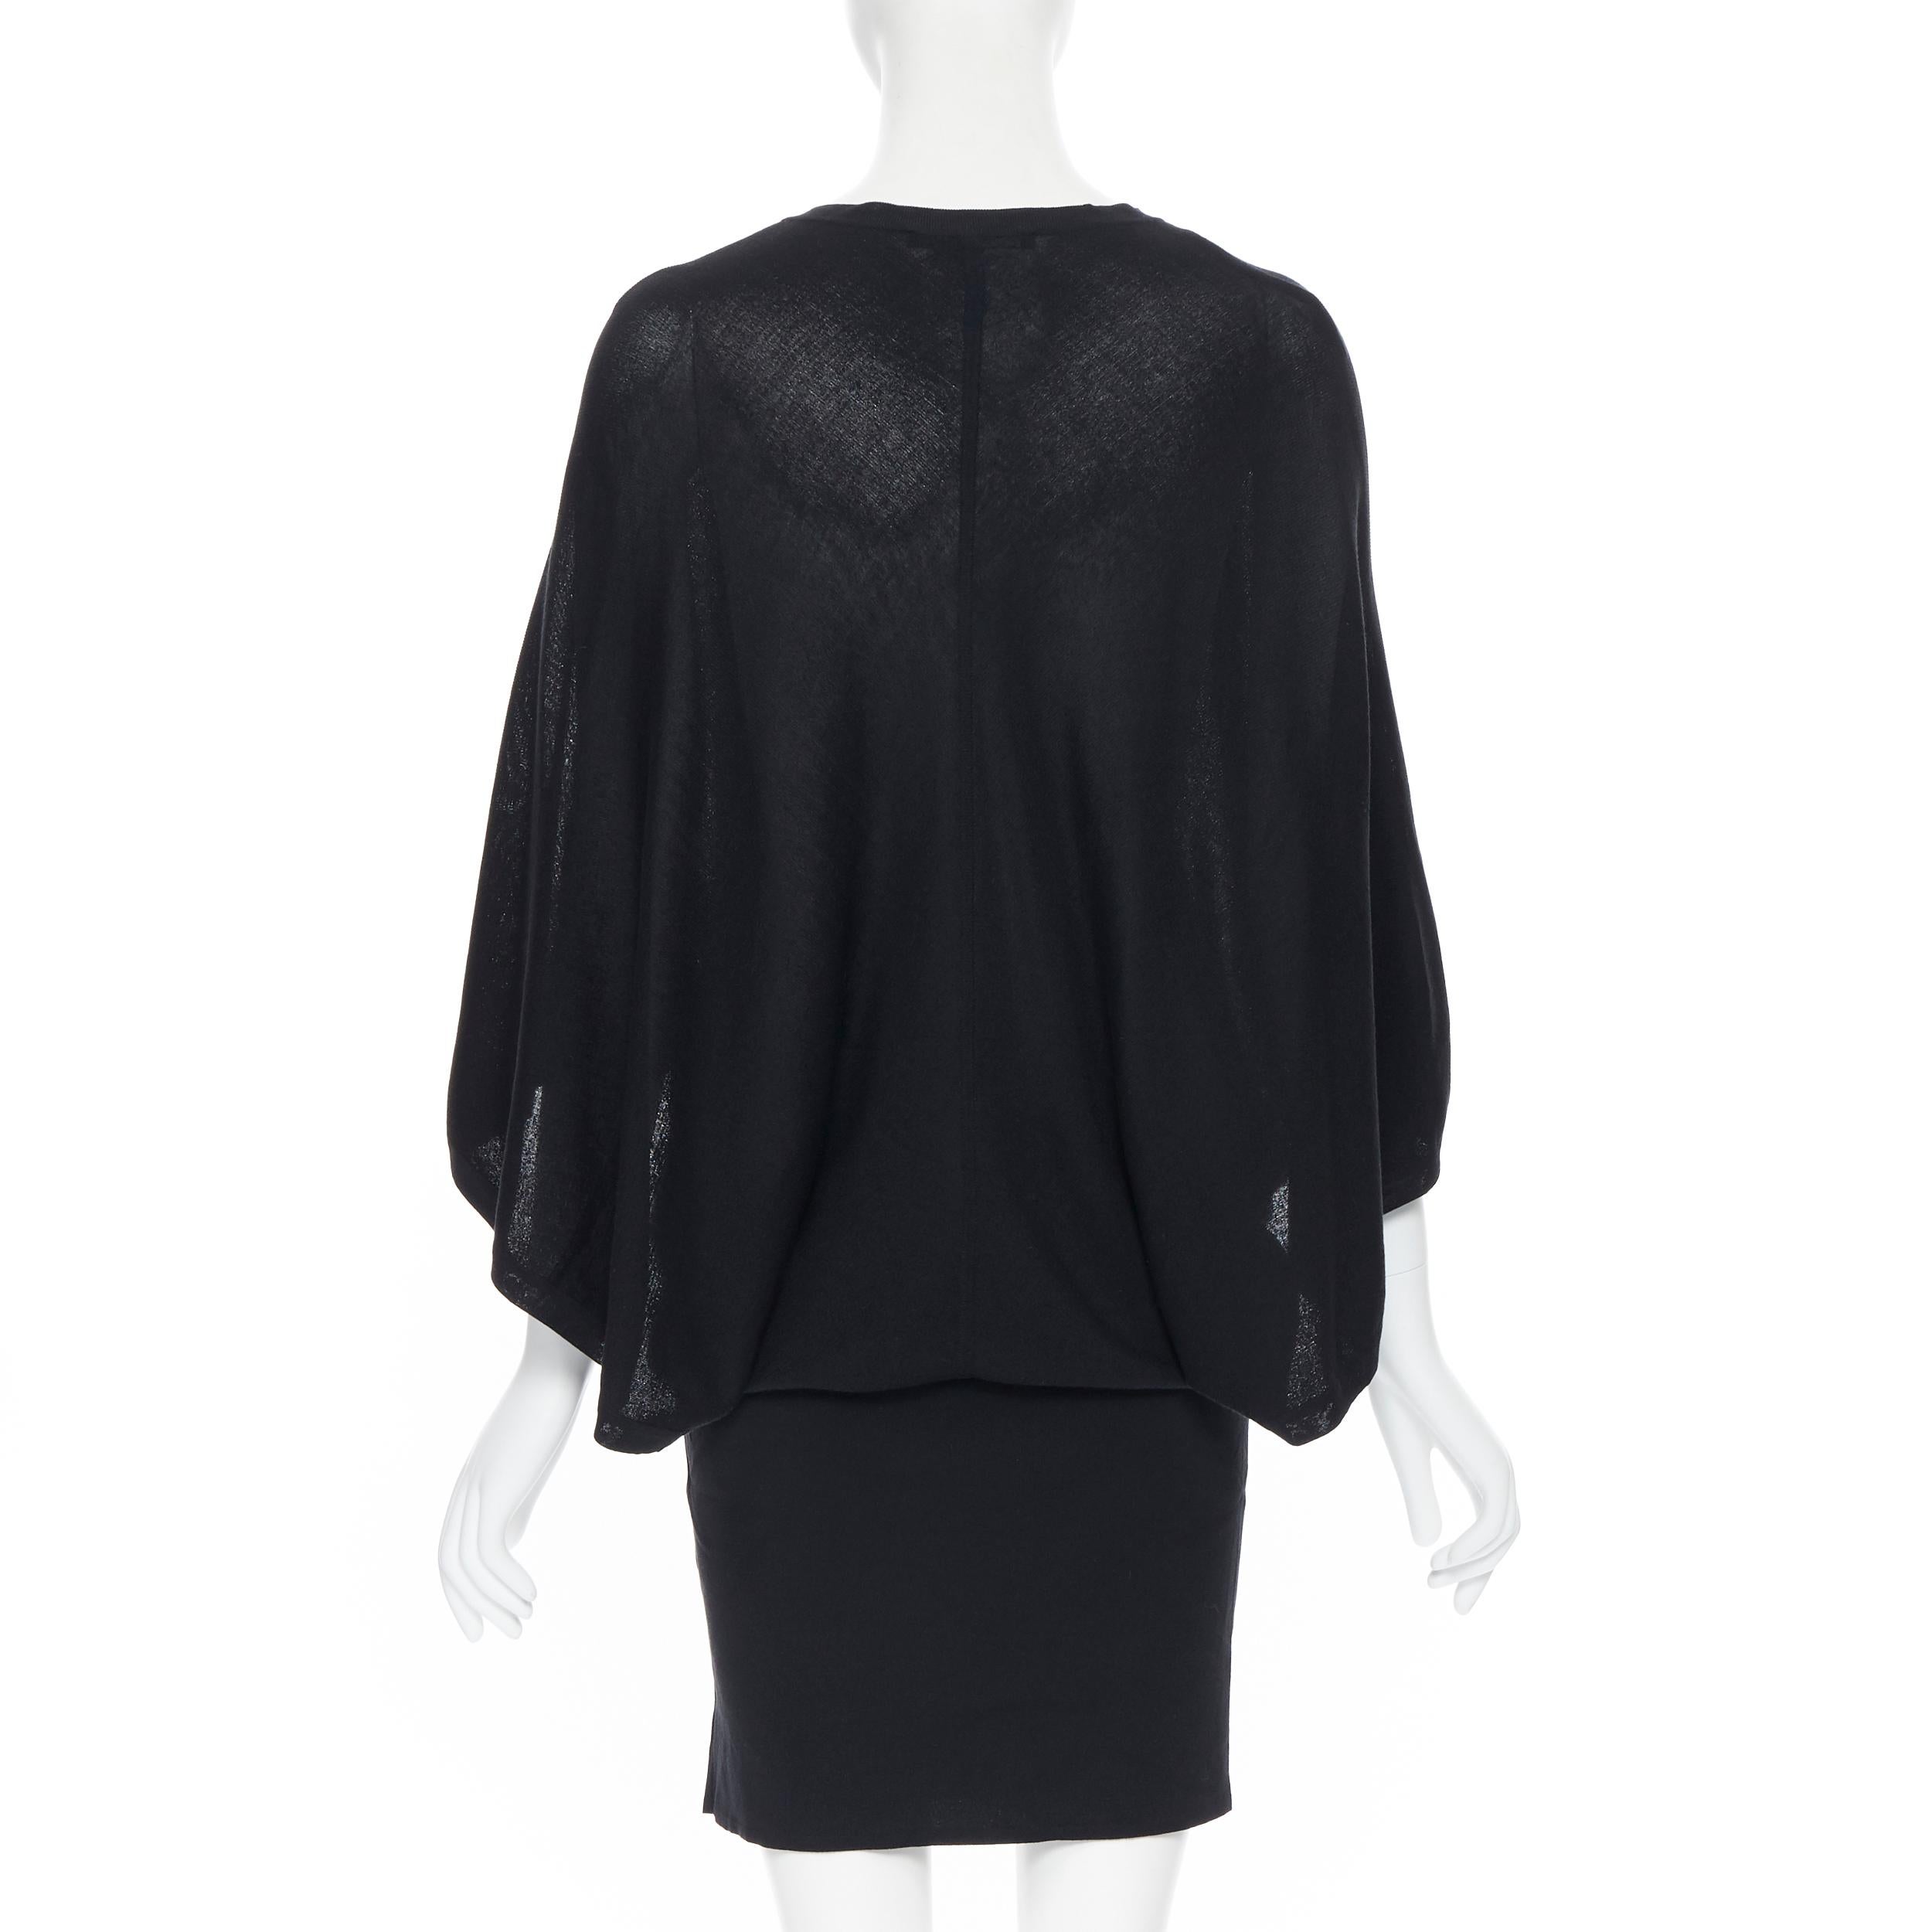 GUCCI 100% silk knitted kyehole front kimono batwing cape sleeve draped dress M
Brand: Gucci
Model Name / Style: Silk dress
Material: Silk
Color: Black
Pattern: Solid
Closure: Button
Extra Detail: Concealed button front. GG logo at waist.
Made in: